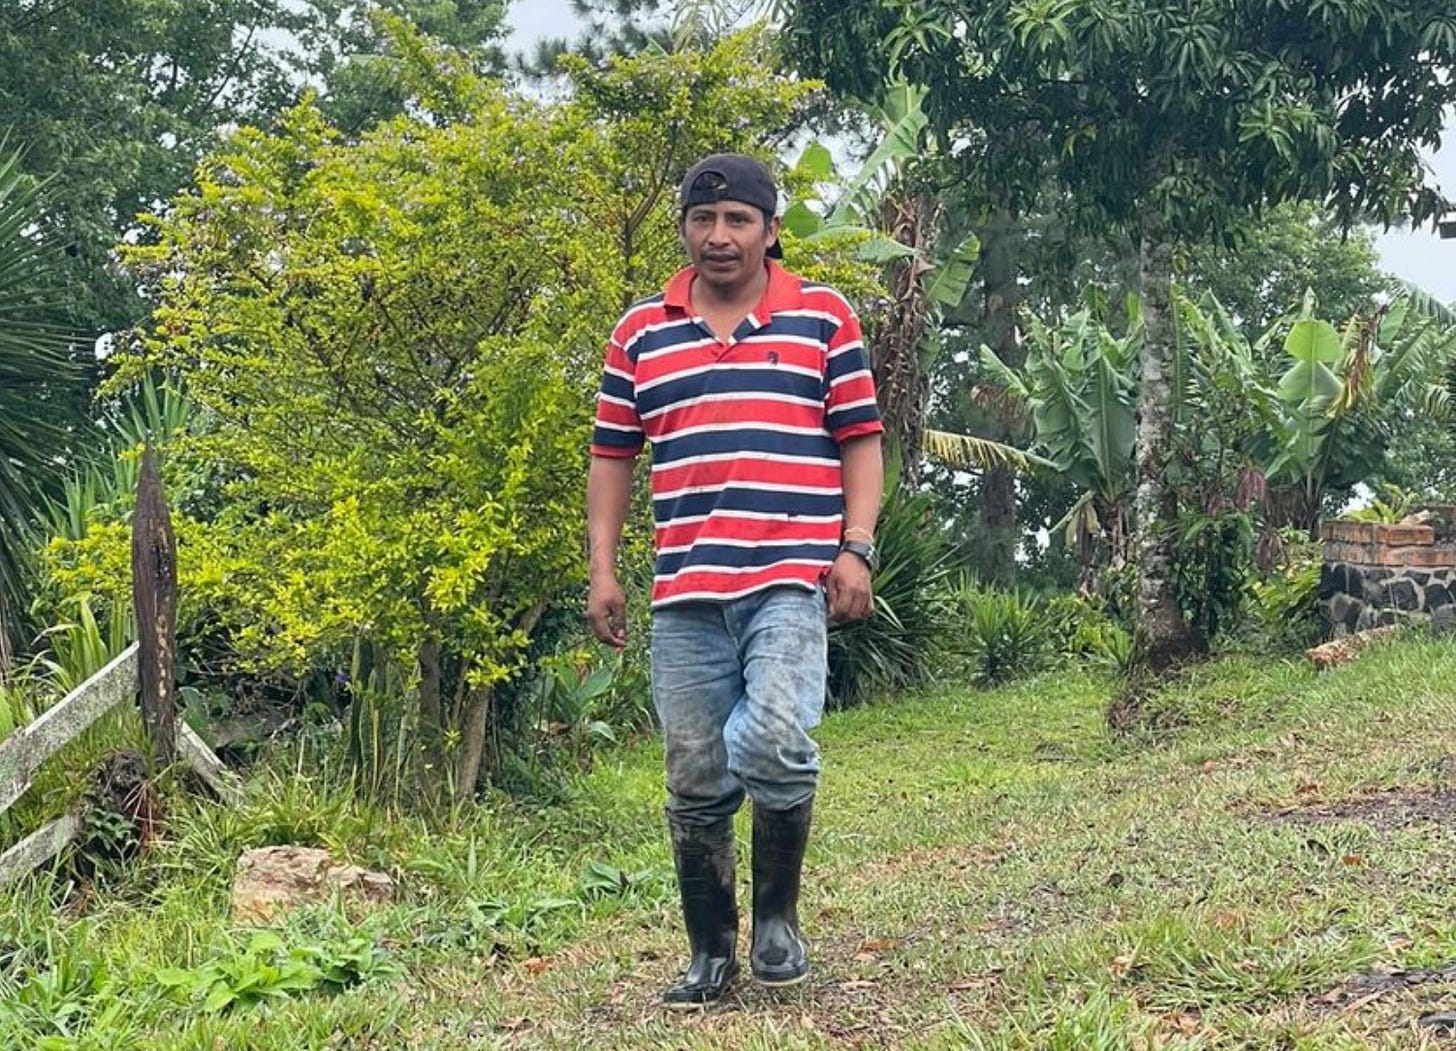 A farmer in tall, black, rubber boots, jeans and a red and blue striped polo shirt walks through the grass along a wooden fence surrounded by lush, green foliage.